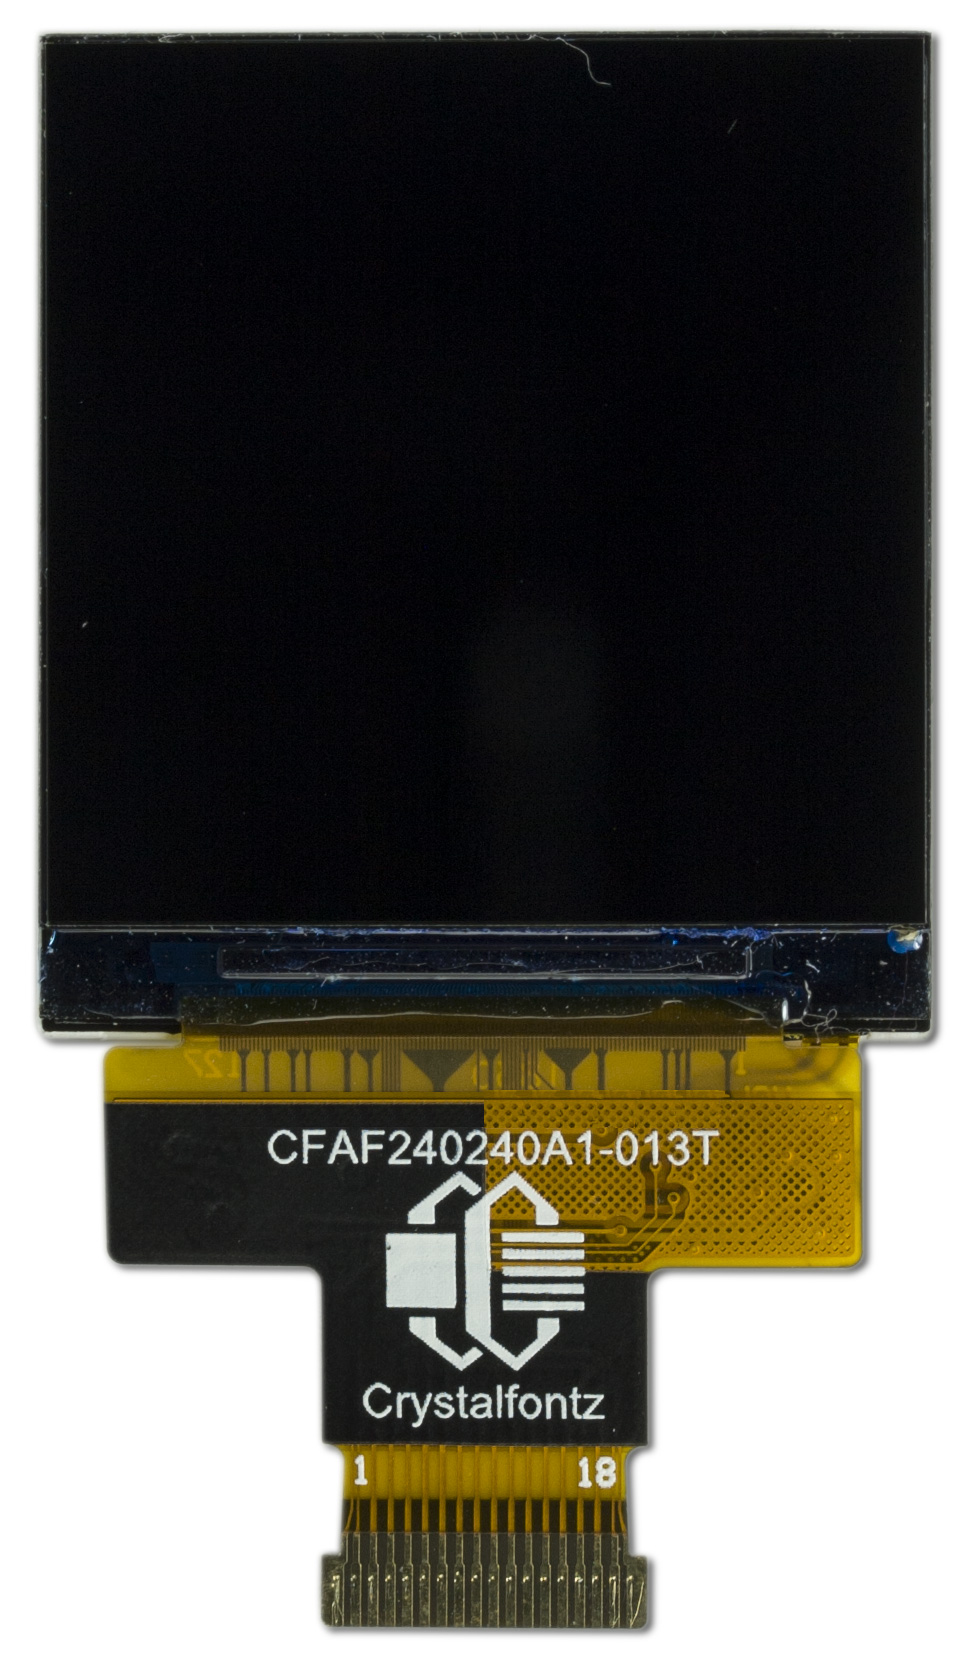 240x240 Color TFT LCD Display from Crystalfontz